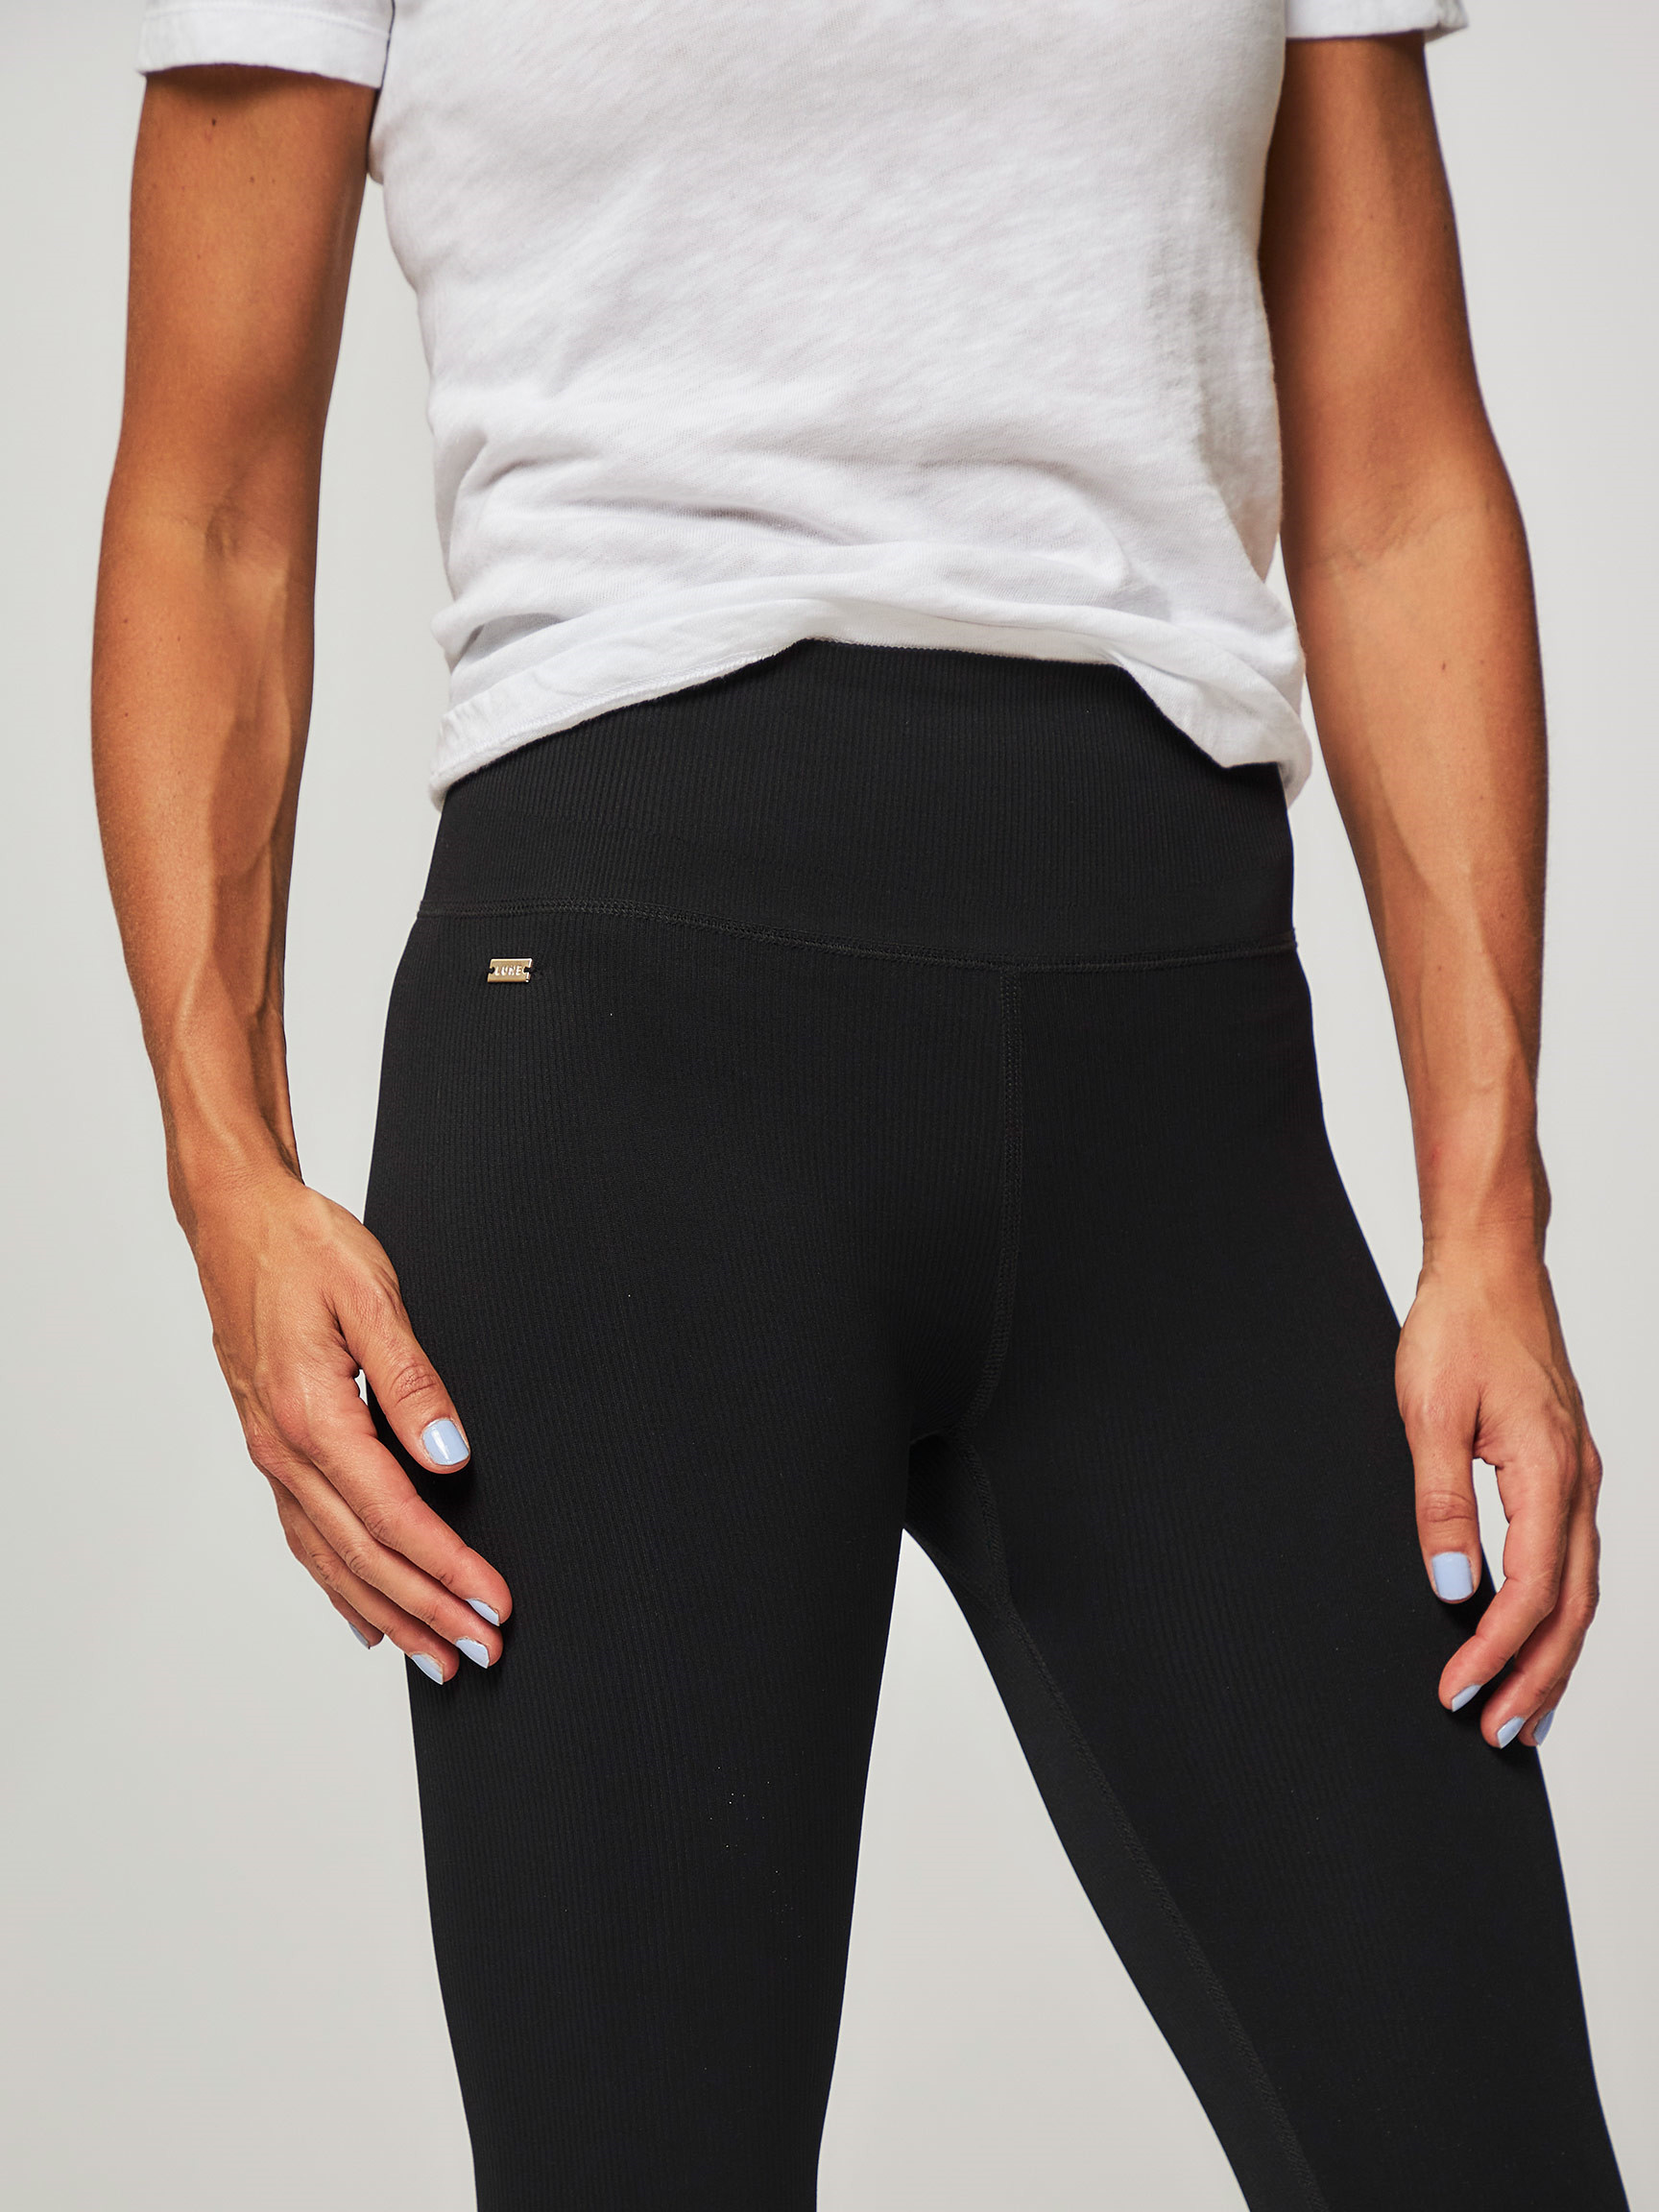 Black Perfect Fit jersey leggings, Wolford